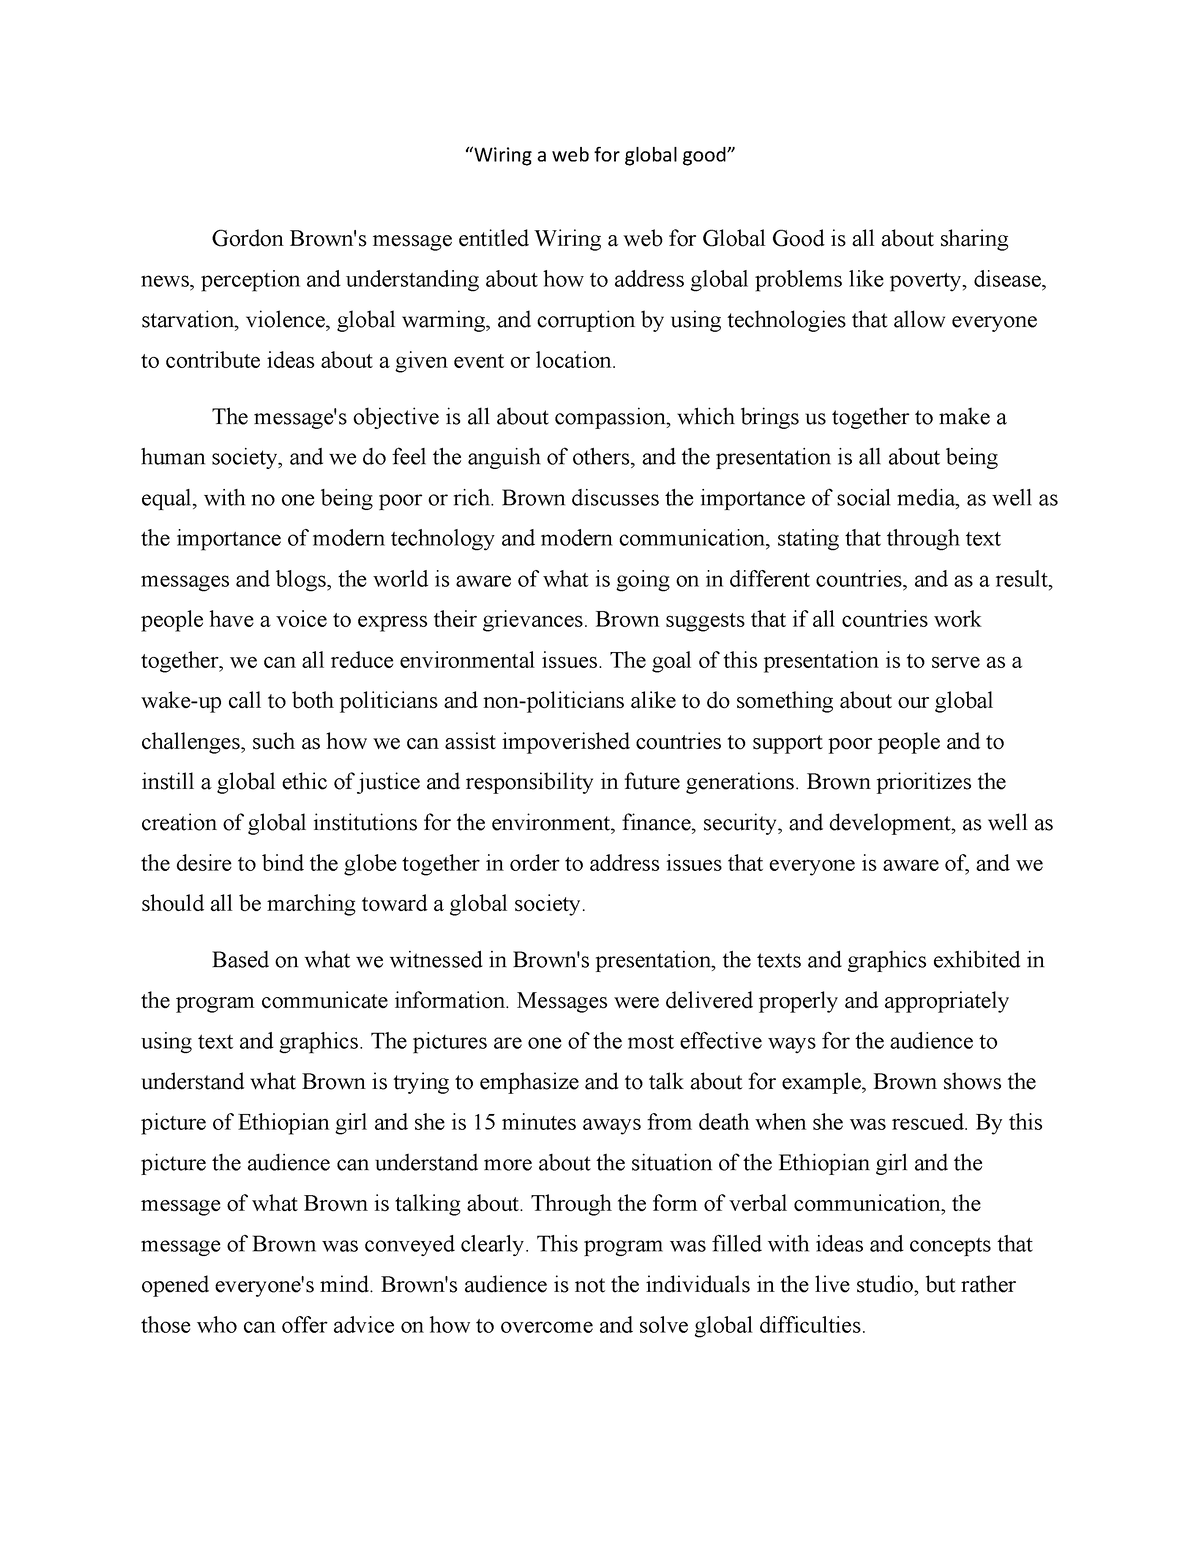 wiring a web for global good essay